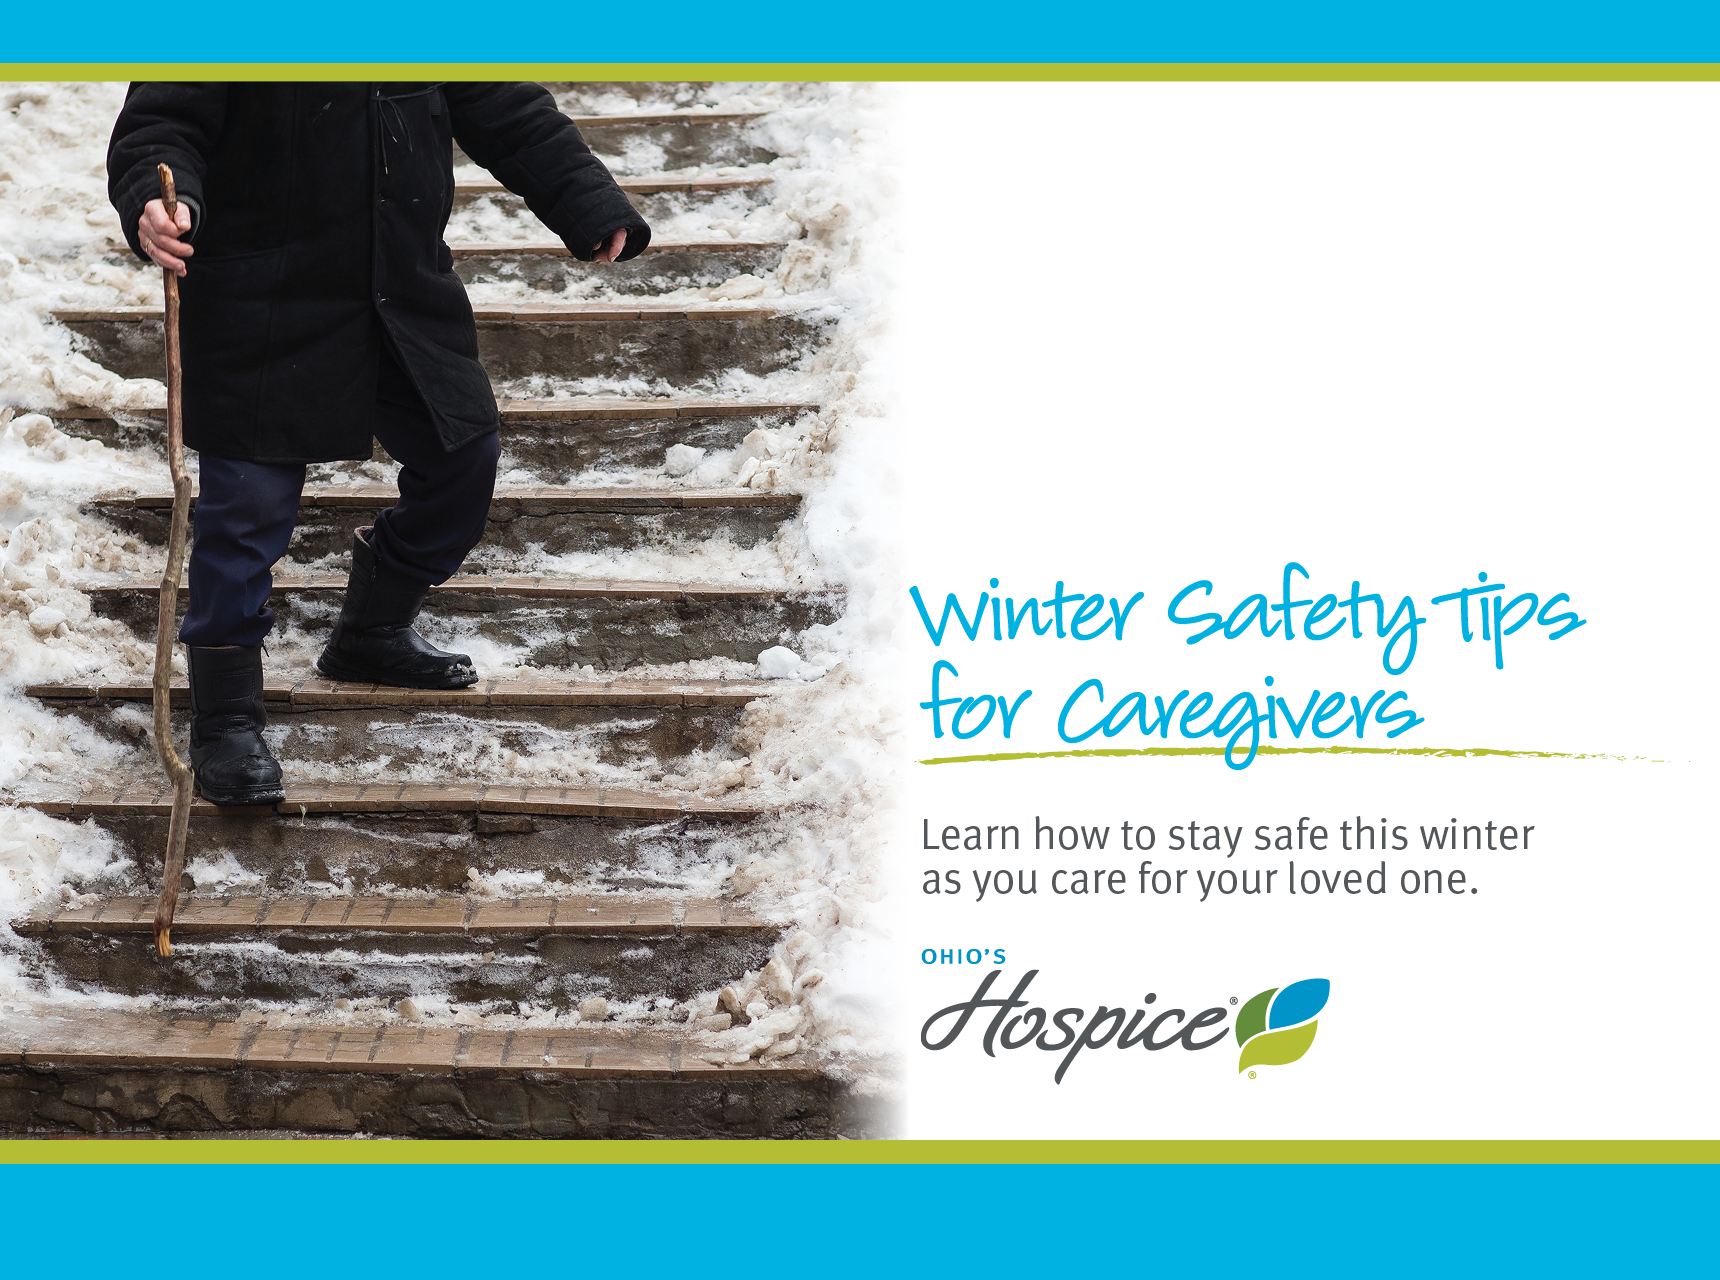 Winter Safety Tips for Caregivers